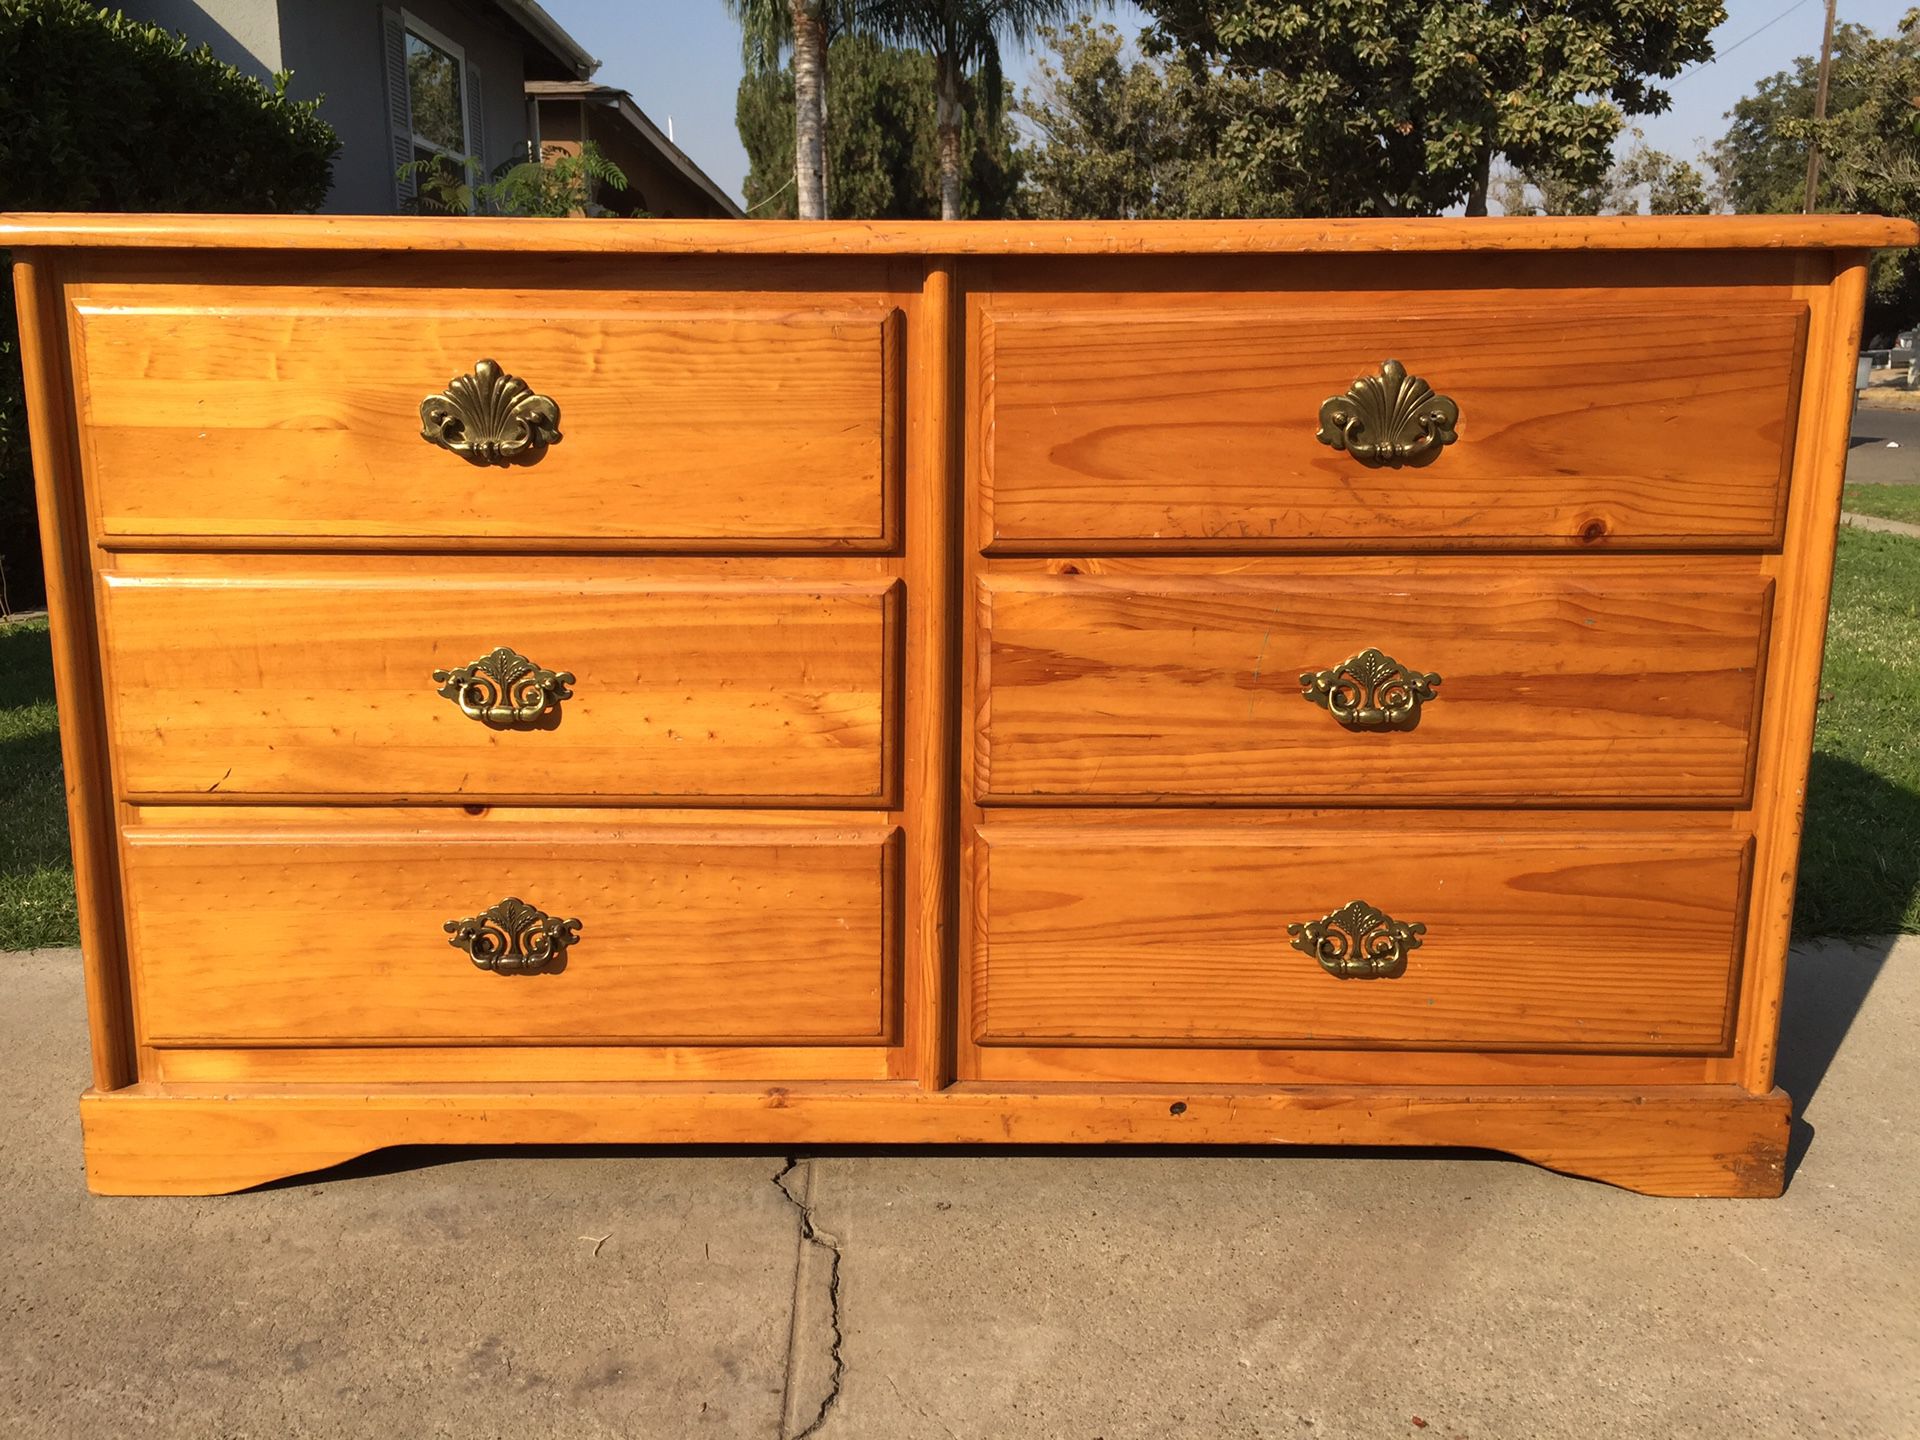 Long dresser come with six drawers in good condition all drawers open fine.